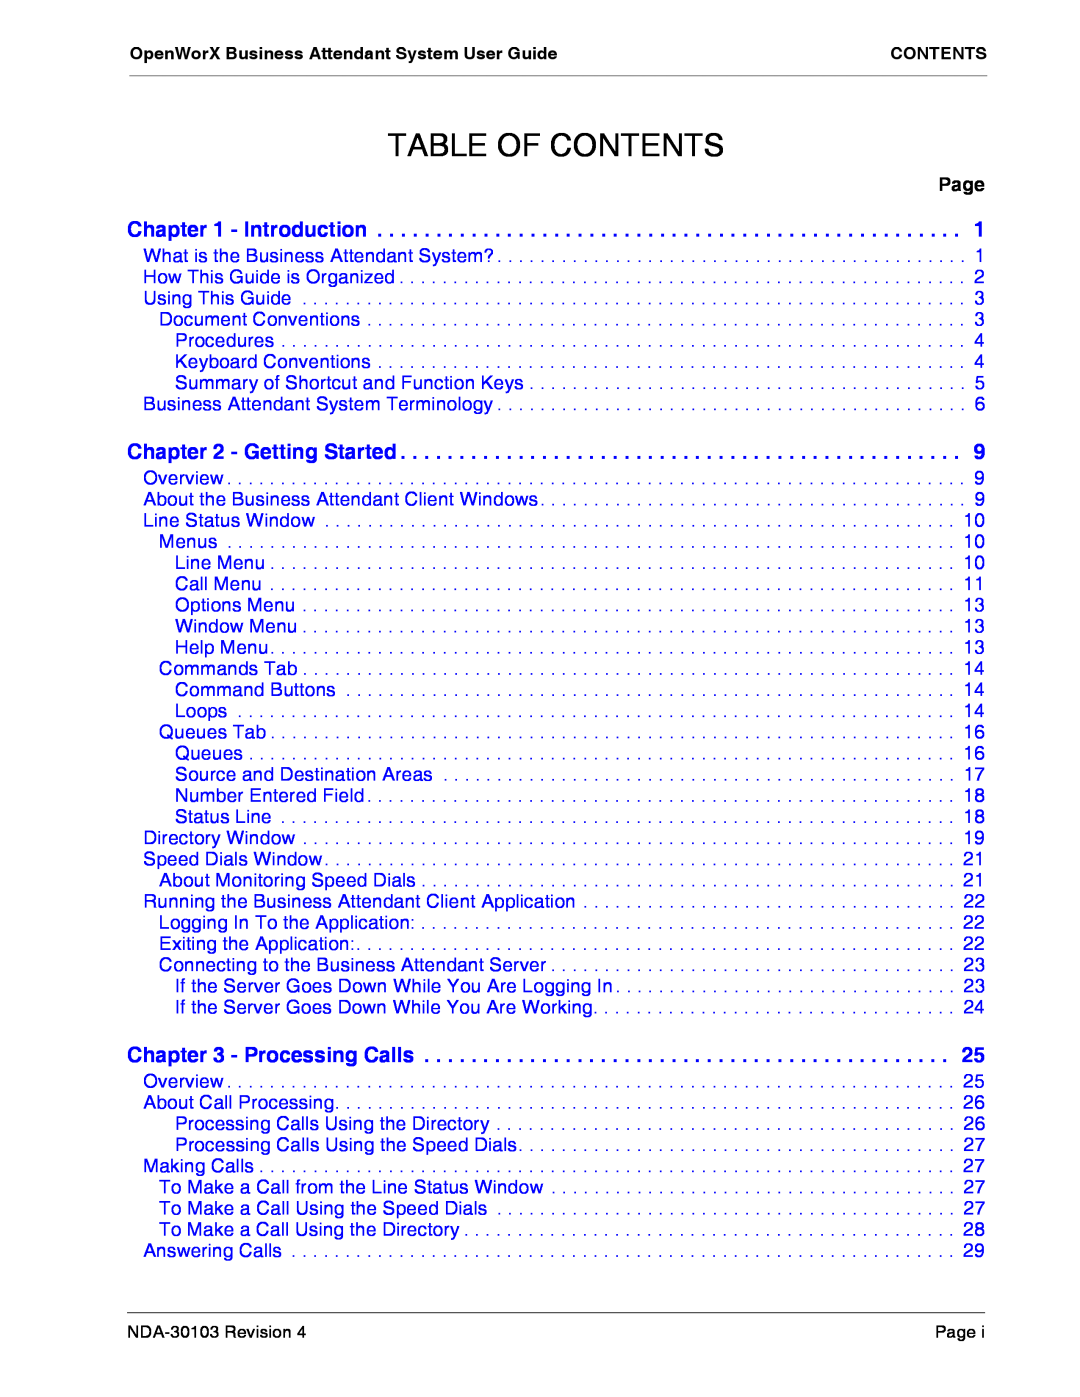 NEC NDA-30103-004 manual Table Of Contents, Page 